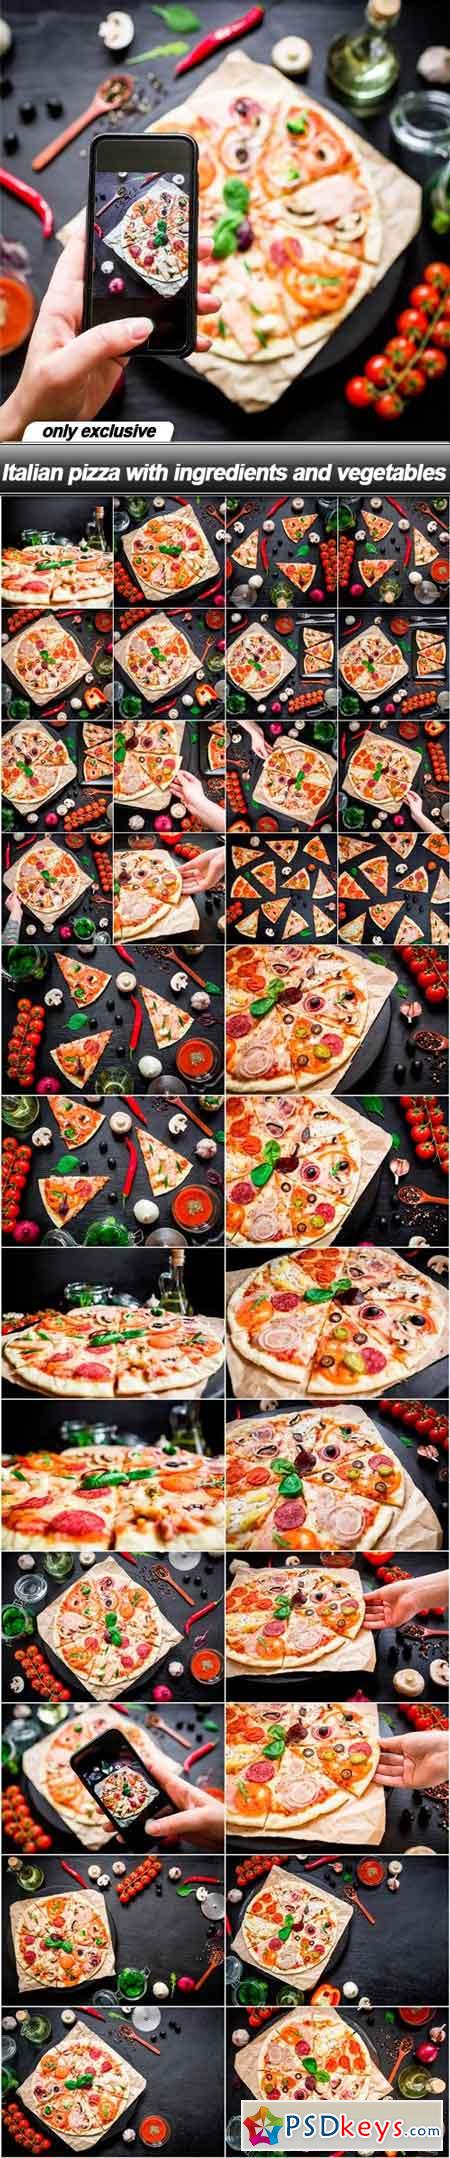 Italian pizza with ingredients and vegetables - 33 UHQ JPEG